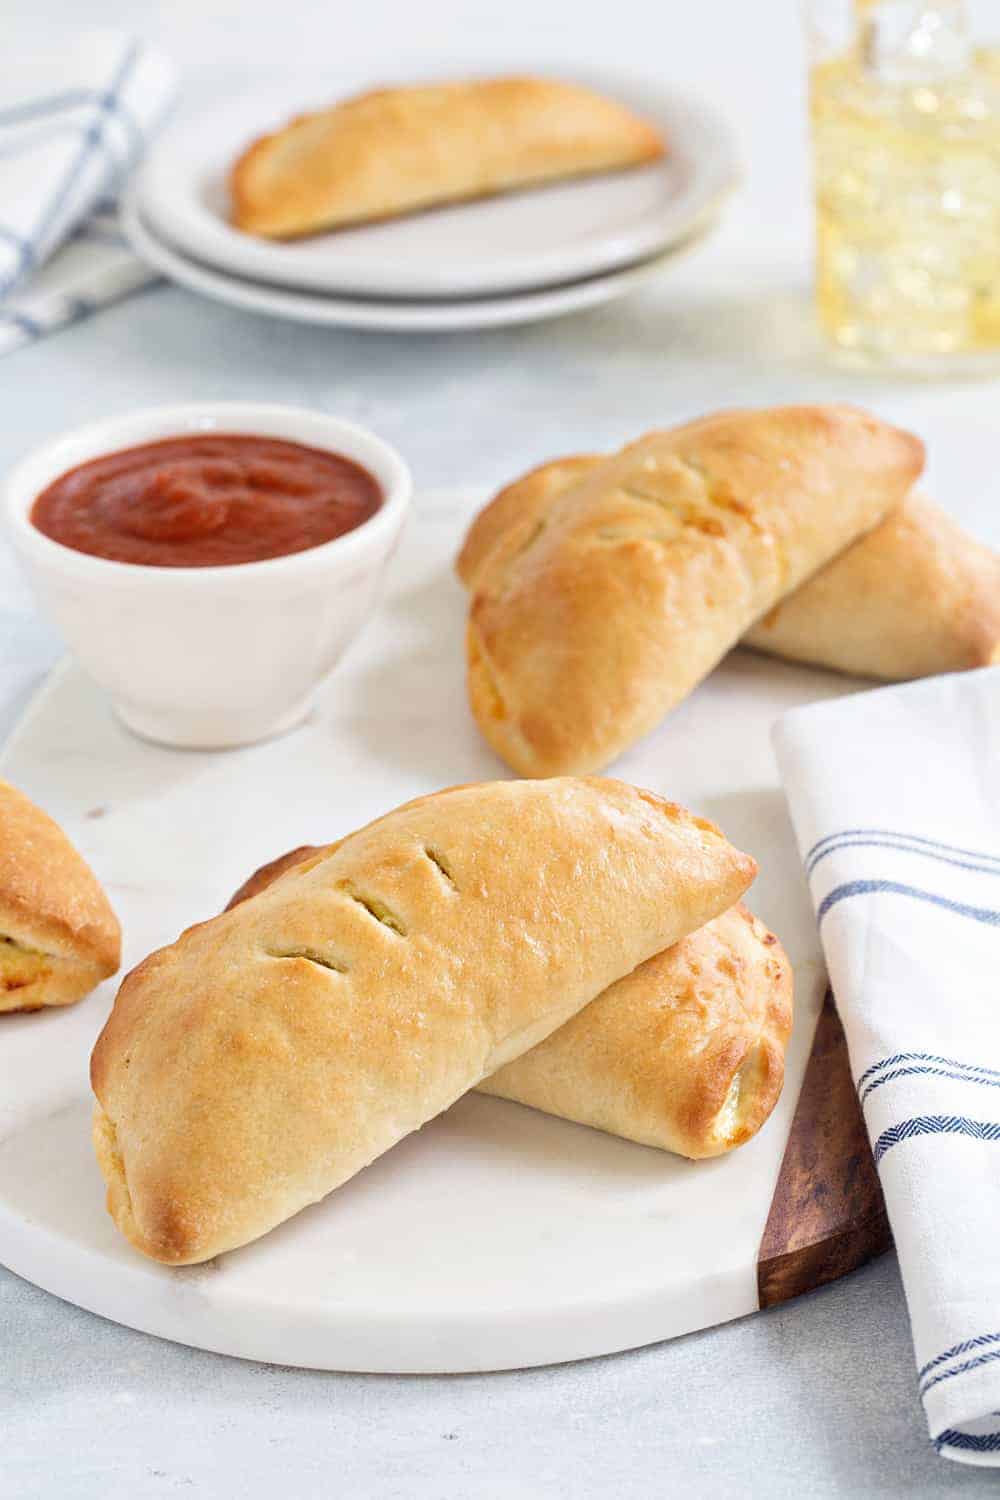 Easy Pizza Pockets come together quickly and are totally delish. Fill them with your favorite pizza toppings for the perfect game day snack!